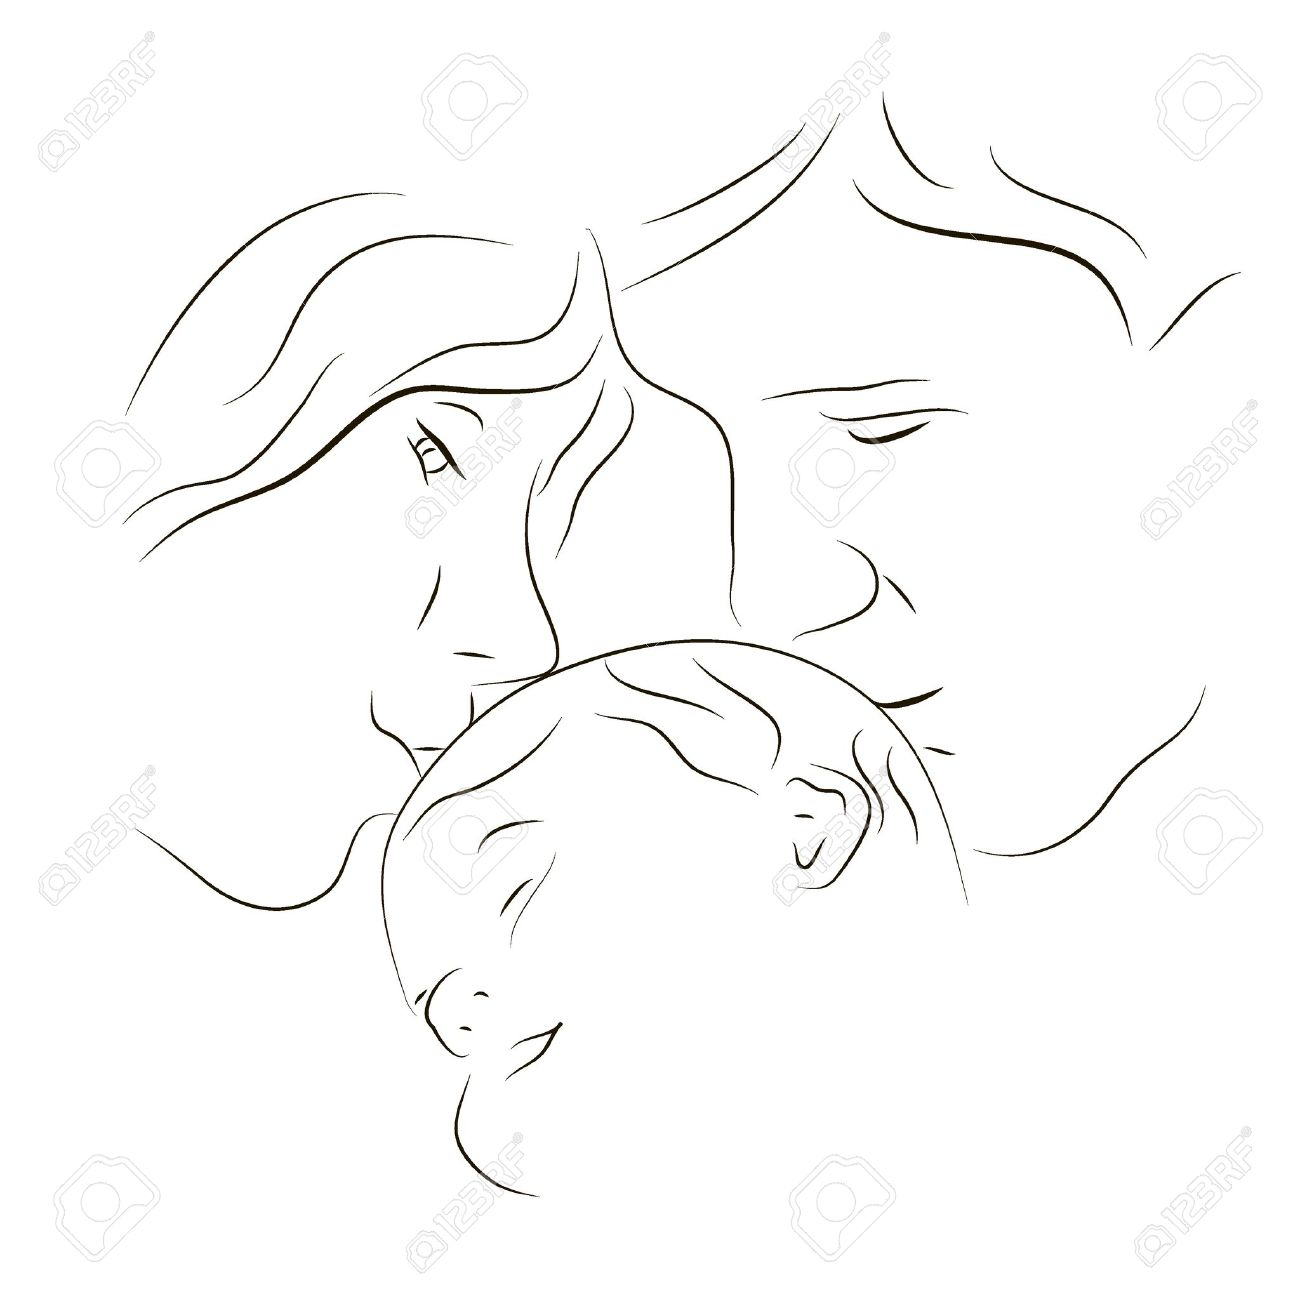 35+ Latest Pencil Drawing Of Father Mother And Child